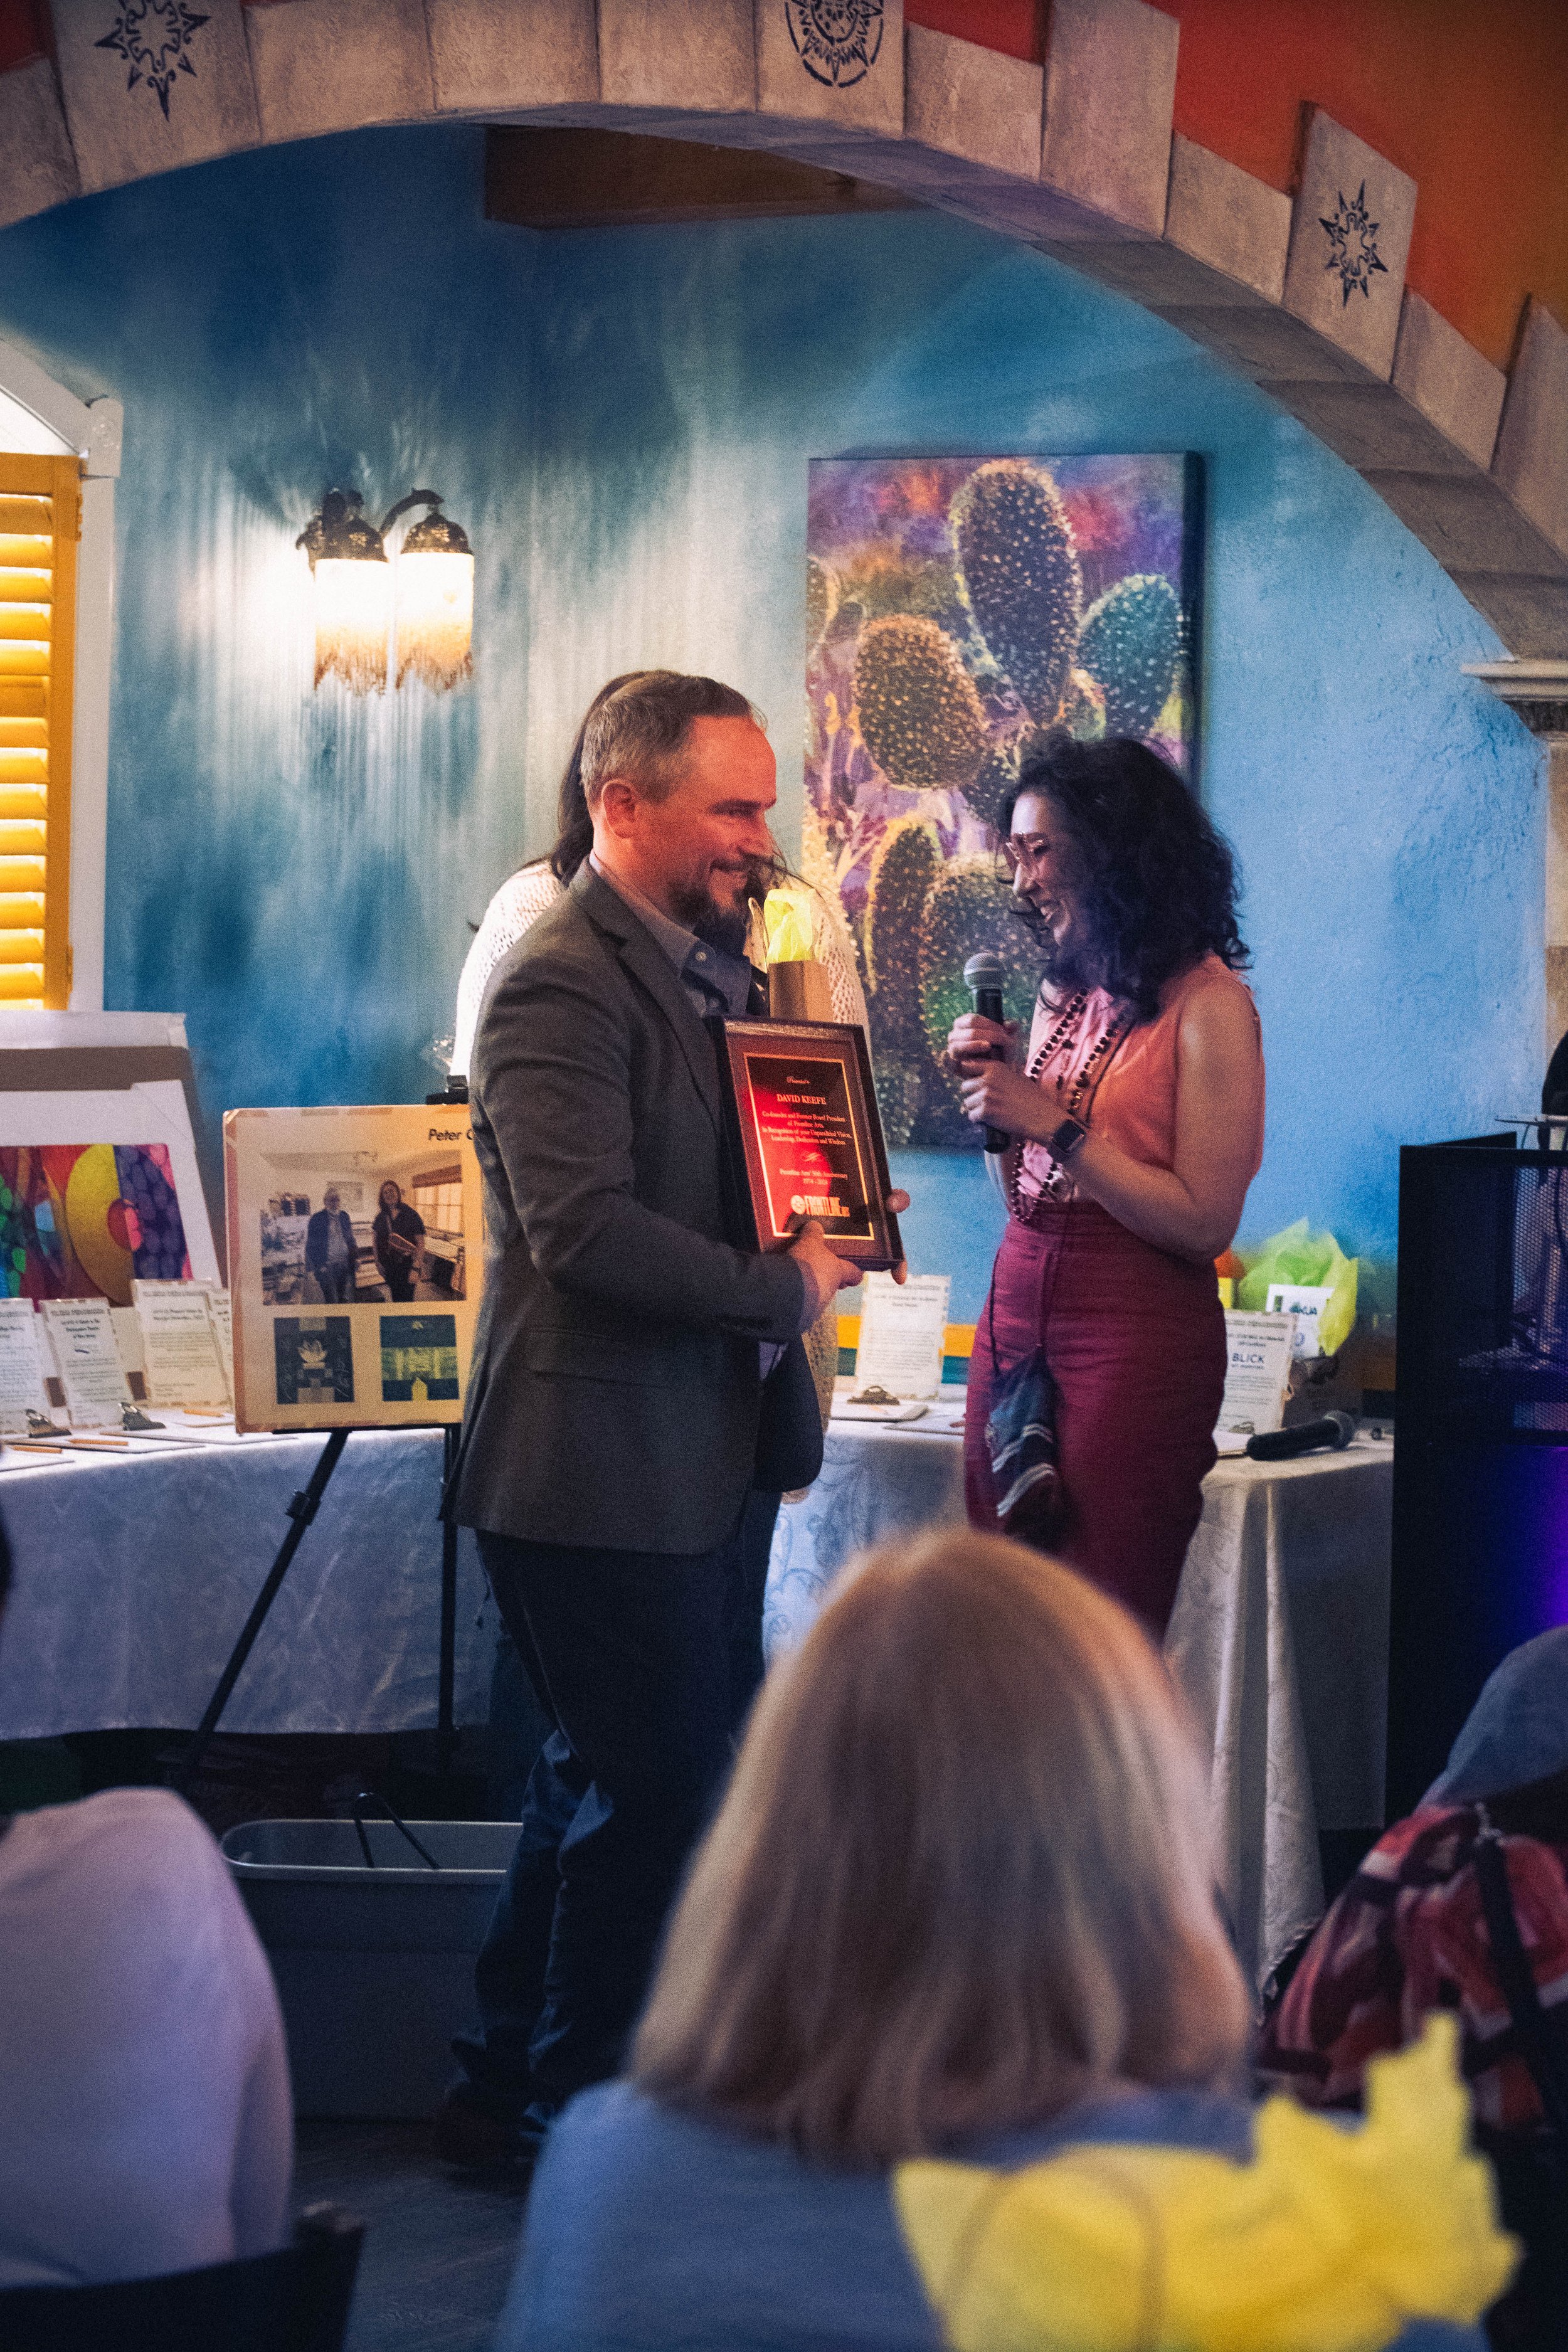  Dave Keefe holds his awarded plaque of wood and golden borders as he smiles to the attendees, with Rachel Heberling standing close by in front of the table with displayed auction items. 